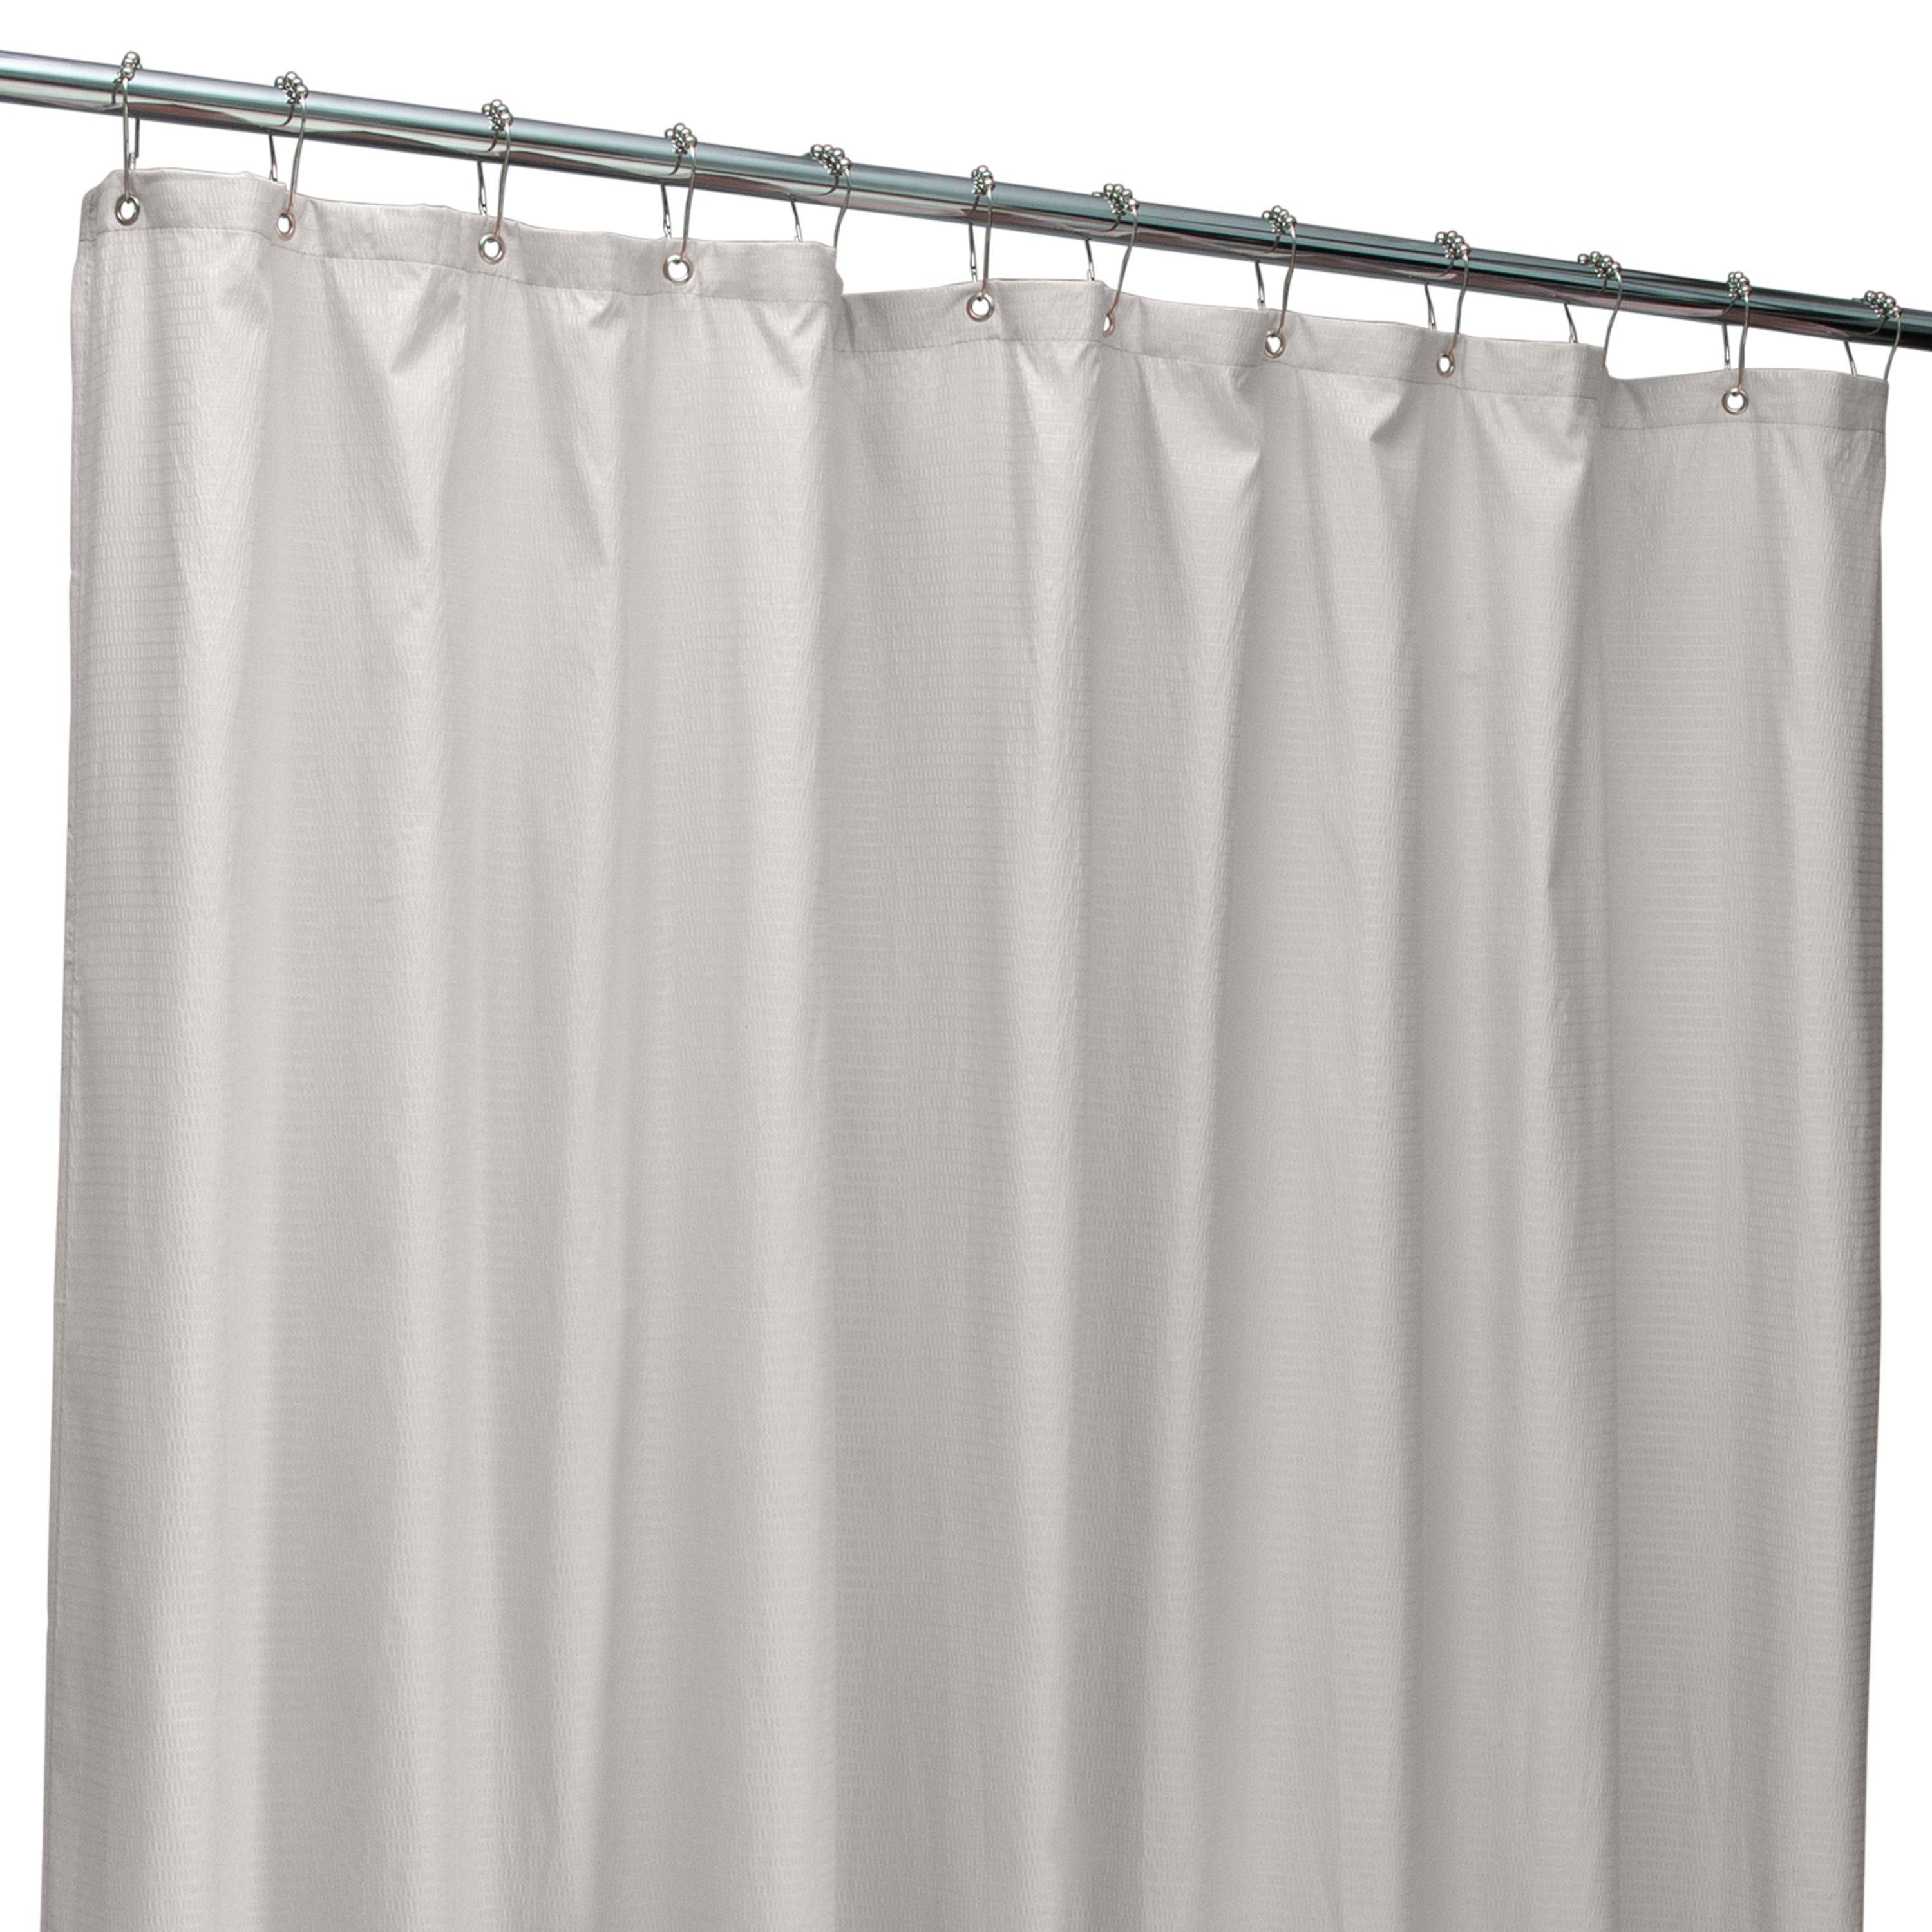 Bath Bliss Heavy Shower Curtain Liner, 12 Rust Resistant Metal Grommets, 3  Weighted Magnet Hem, Blue